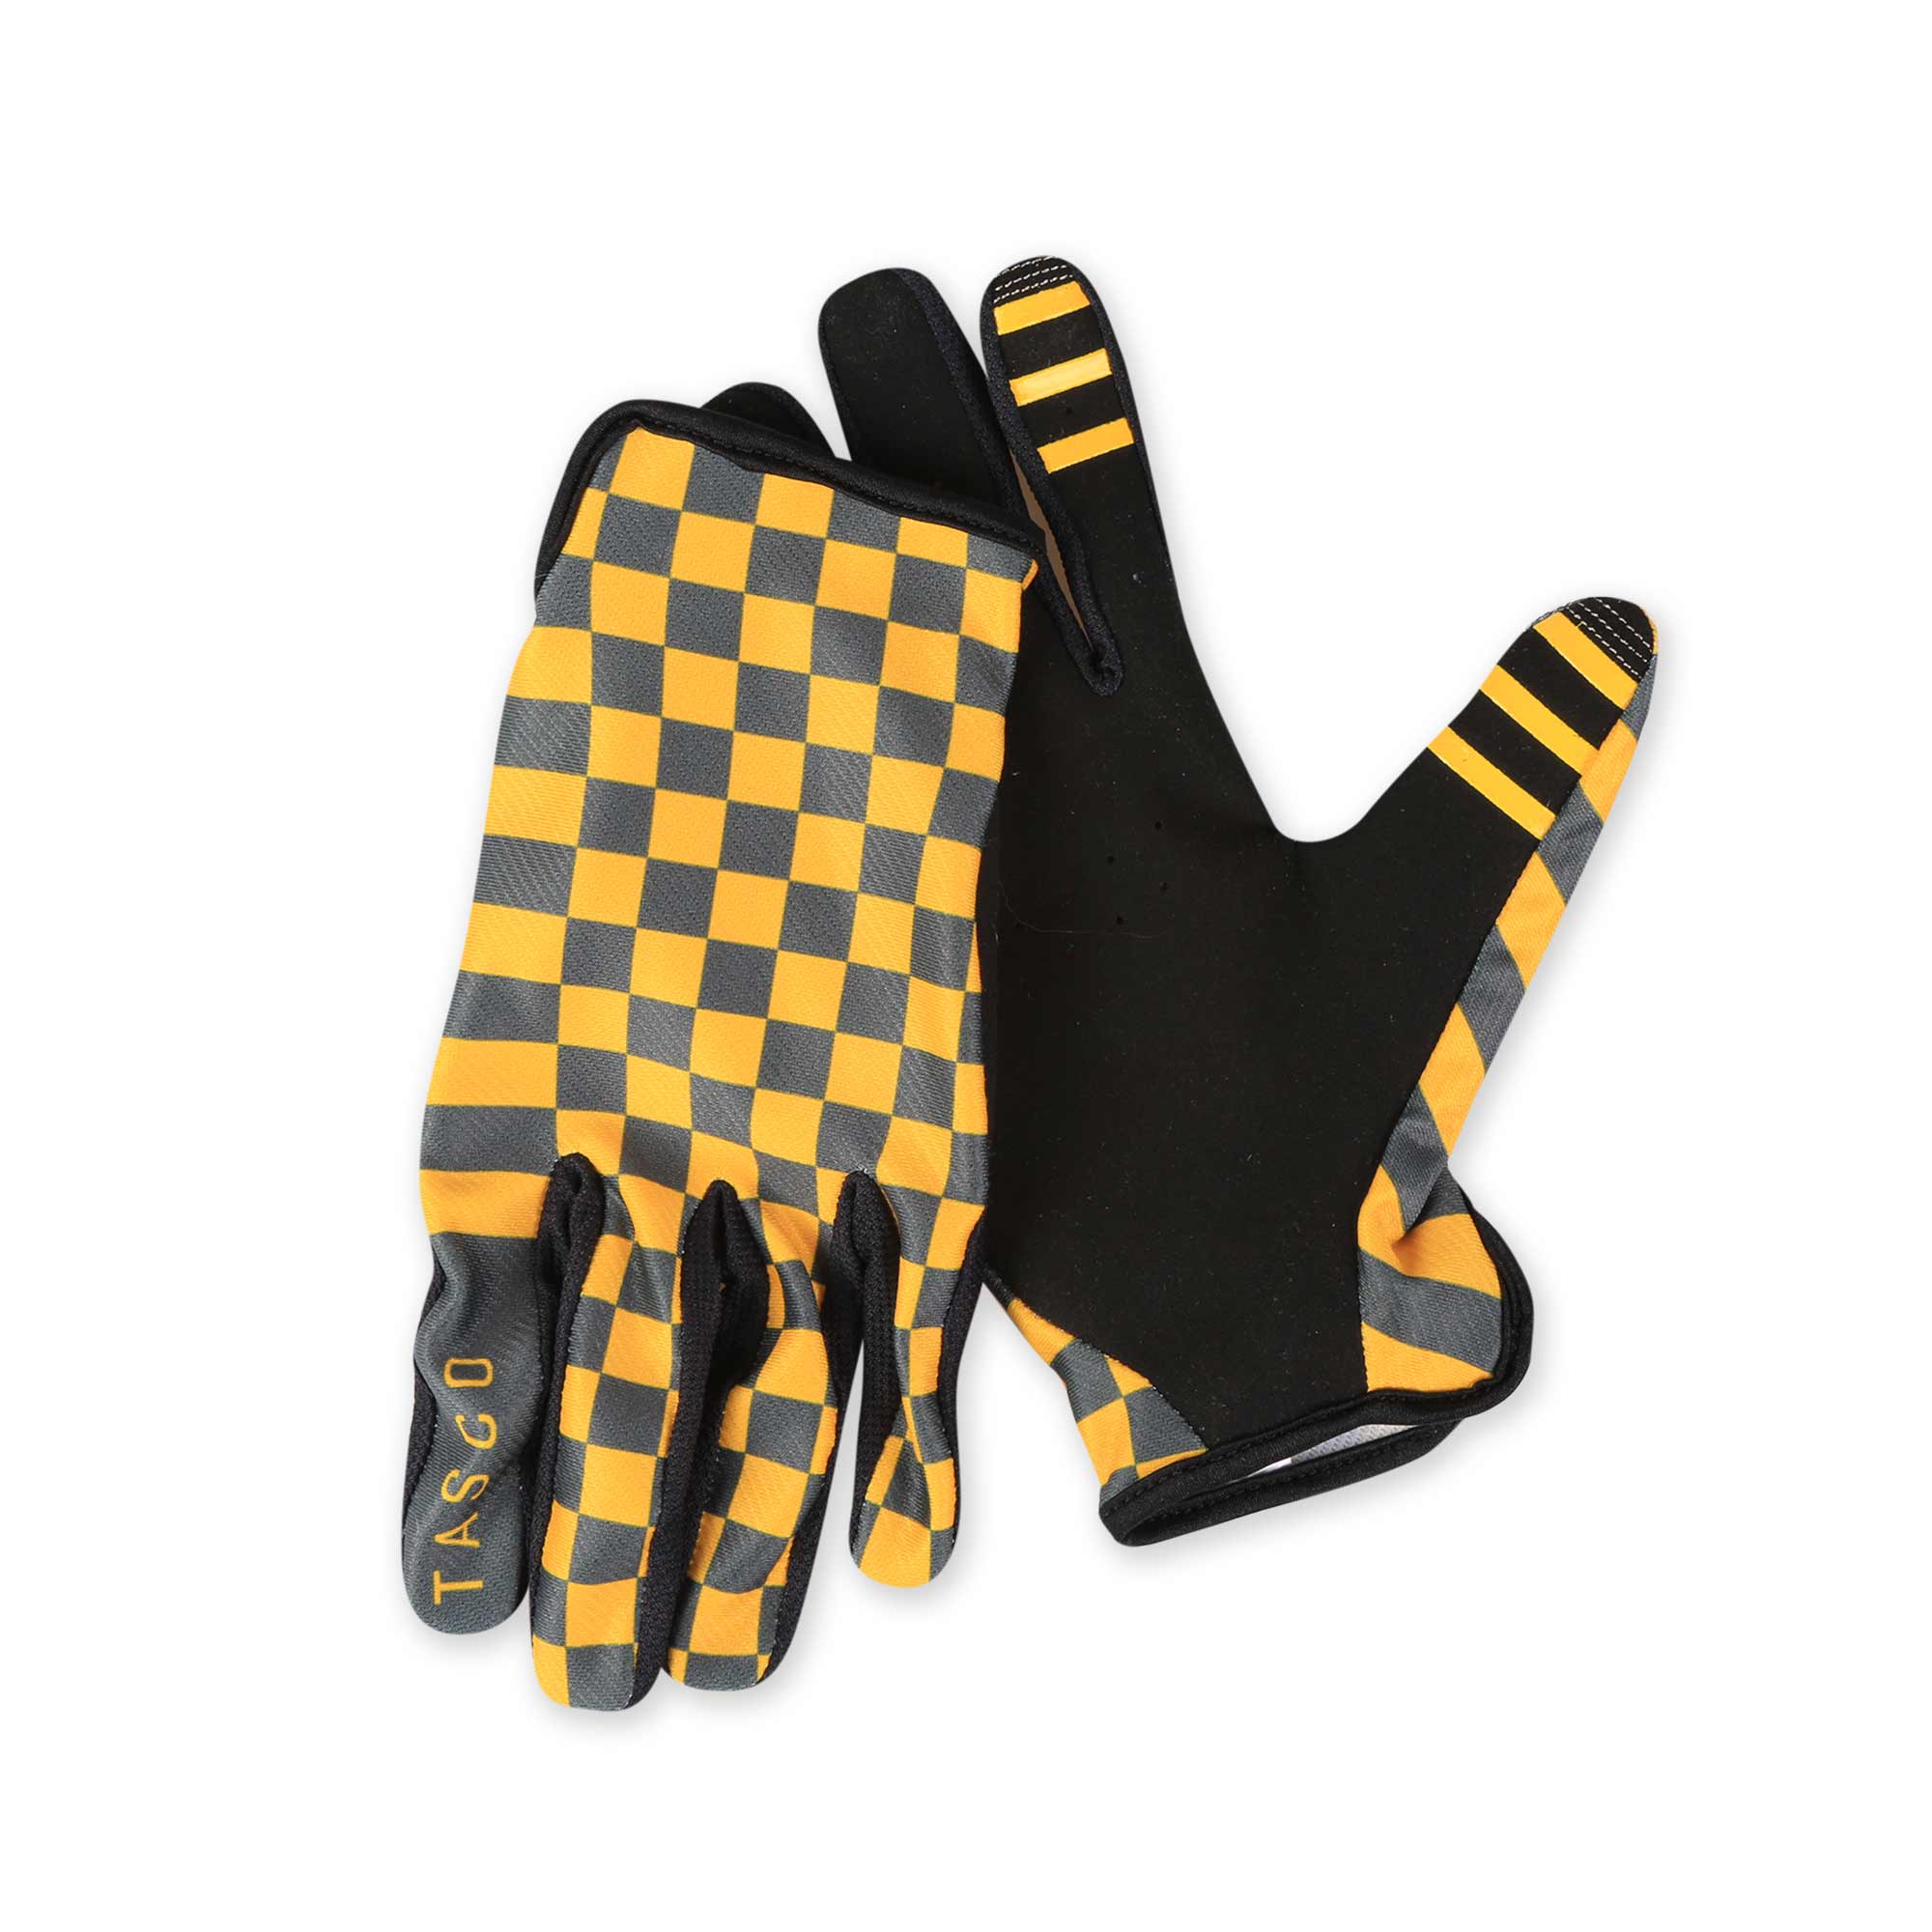 Checkmate-Yellow-gloves-flat_3fbadcde-755b-4a40-9bf0-3485ecbbcecd.jpg